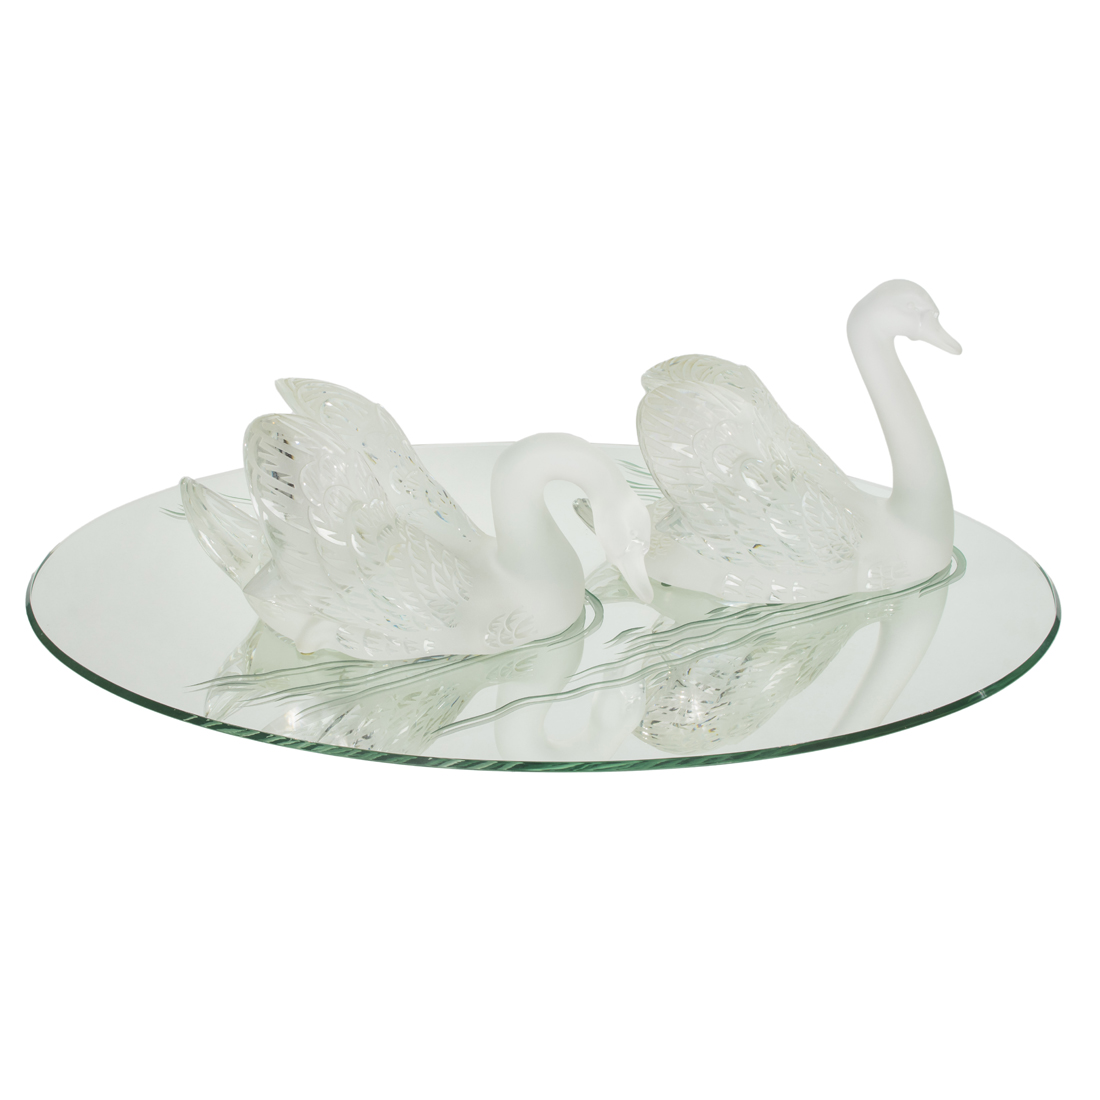 A PAIR OF LALIQUE CLEAR AND FROSTED